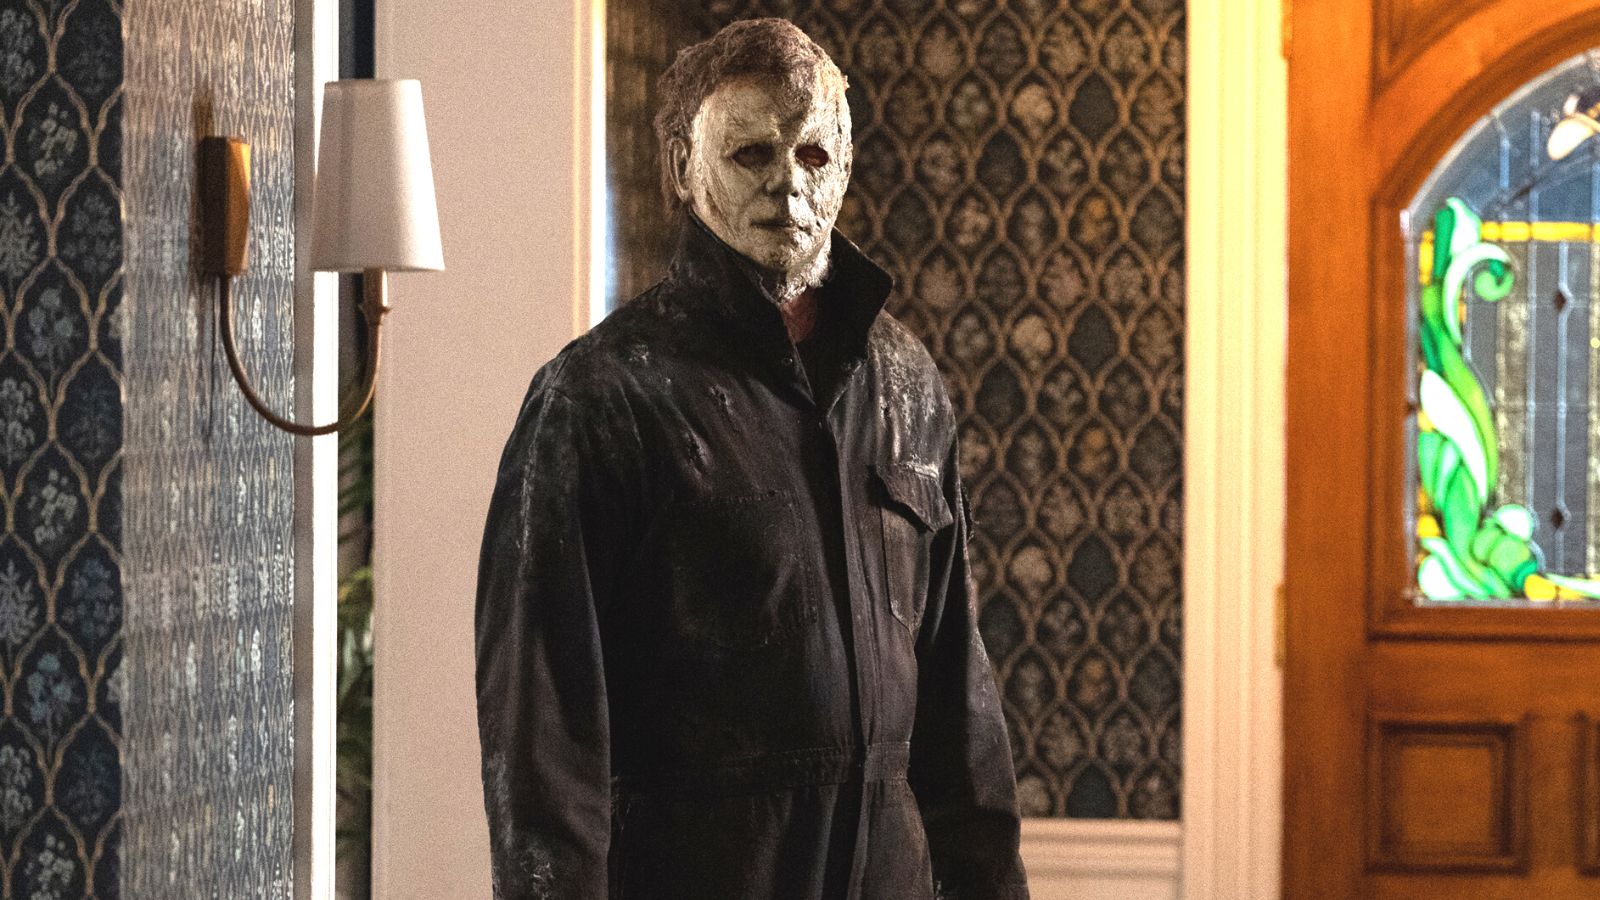 'Halloween Ends' has 58 million reasons to ignore the critical bashing following box office debut